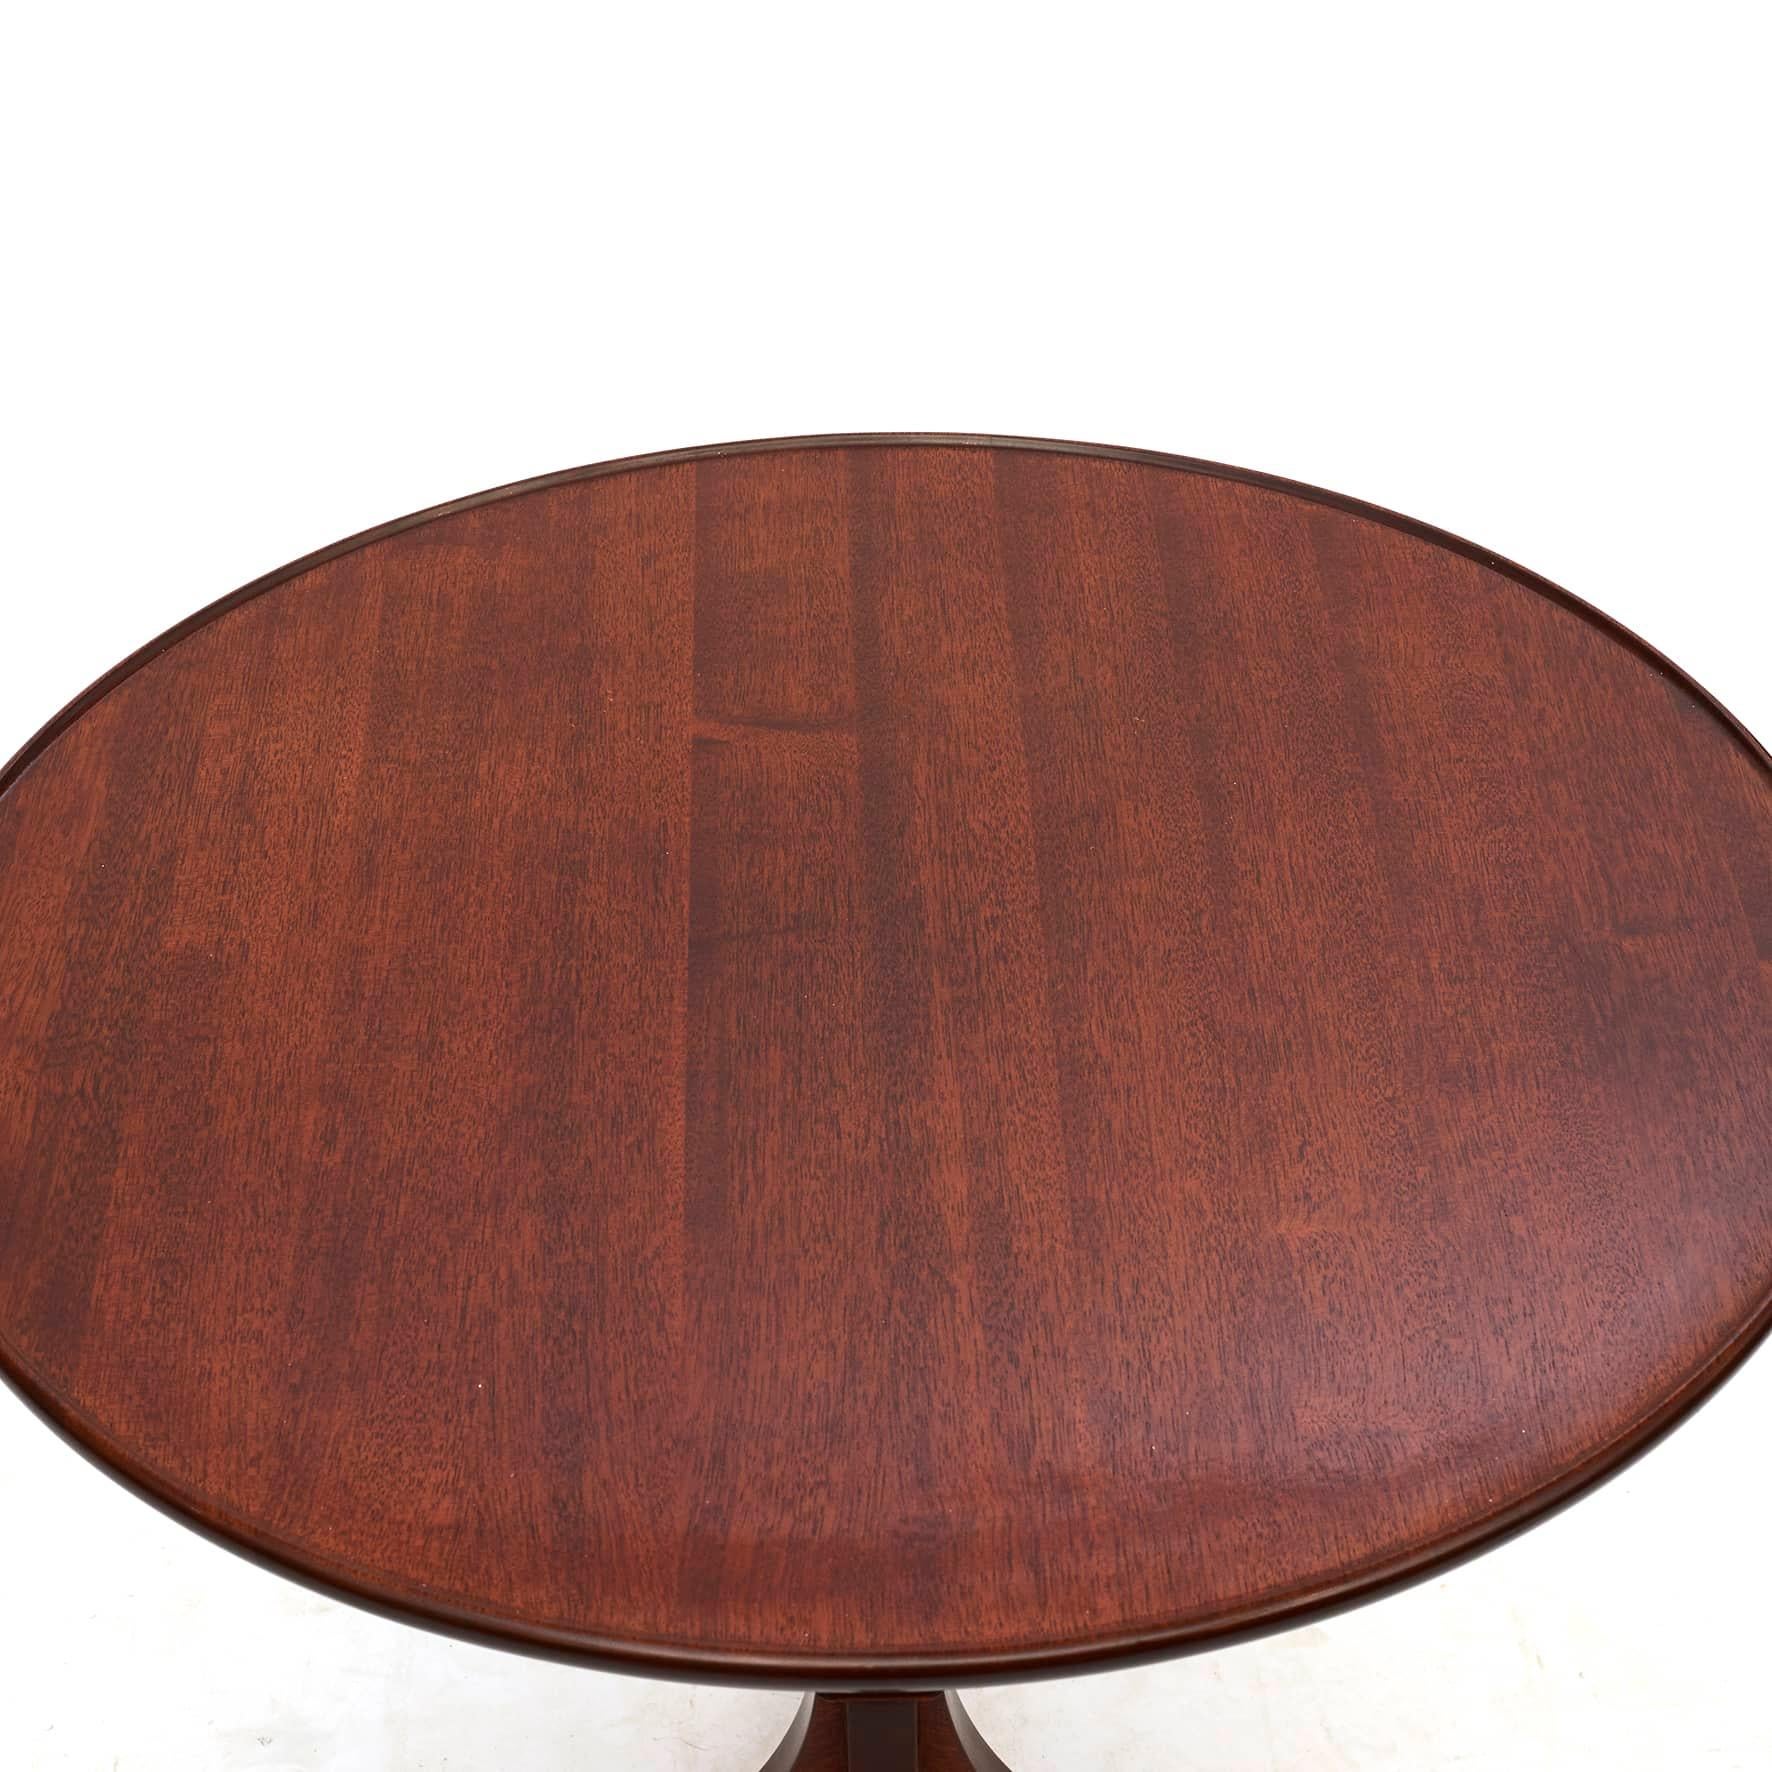 Frits Henningsen mahogany side table.
Circular edged top raised on a clustered stem with four down swept legs.
Designed and produced in the 1940-1950s by cabinetmaker Frits Henningsen at his own workshop.
High quality craftsmanship.